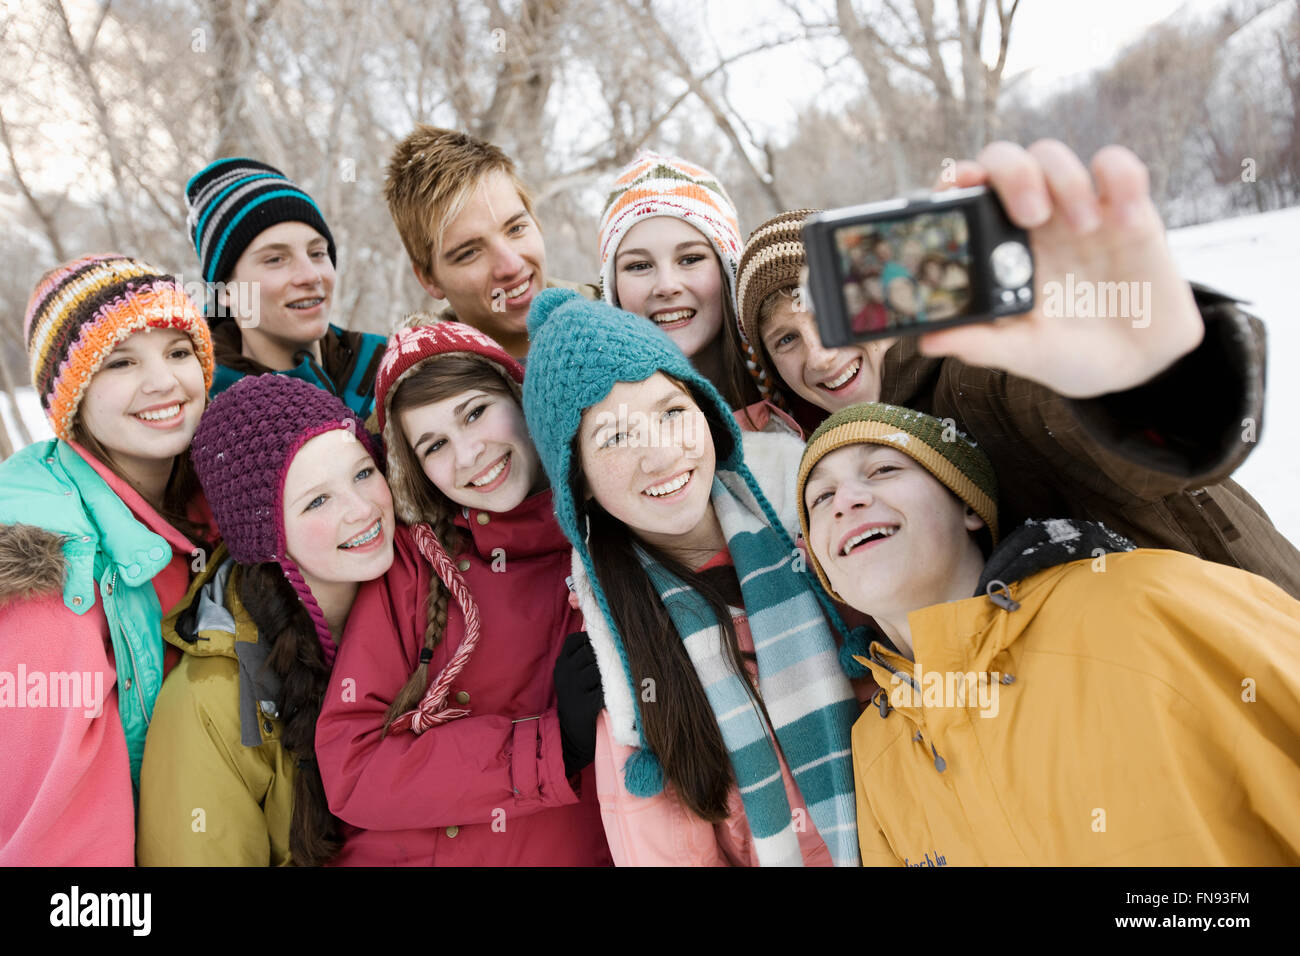 A group of friends posing for a selfy in the snow. Stock Photo